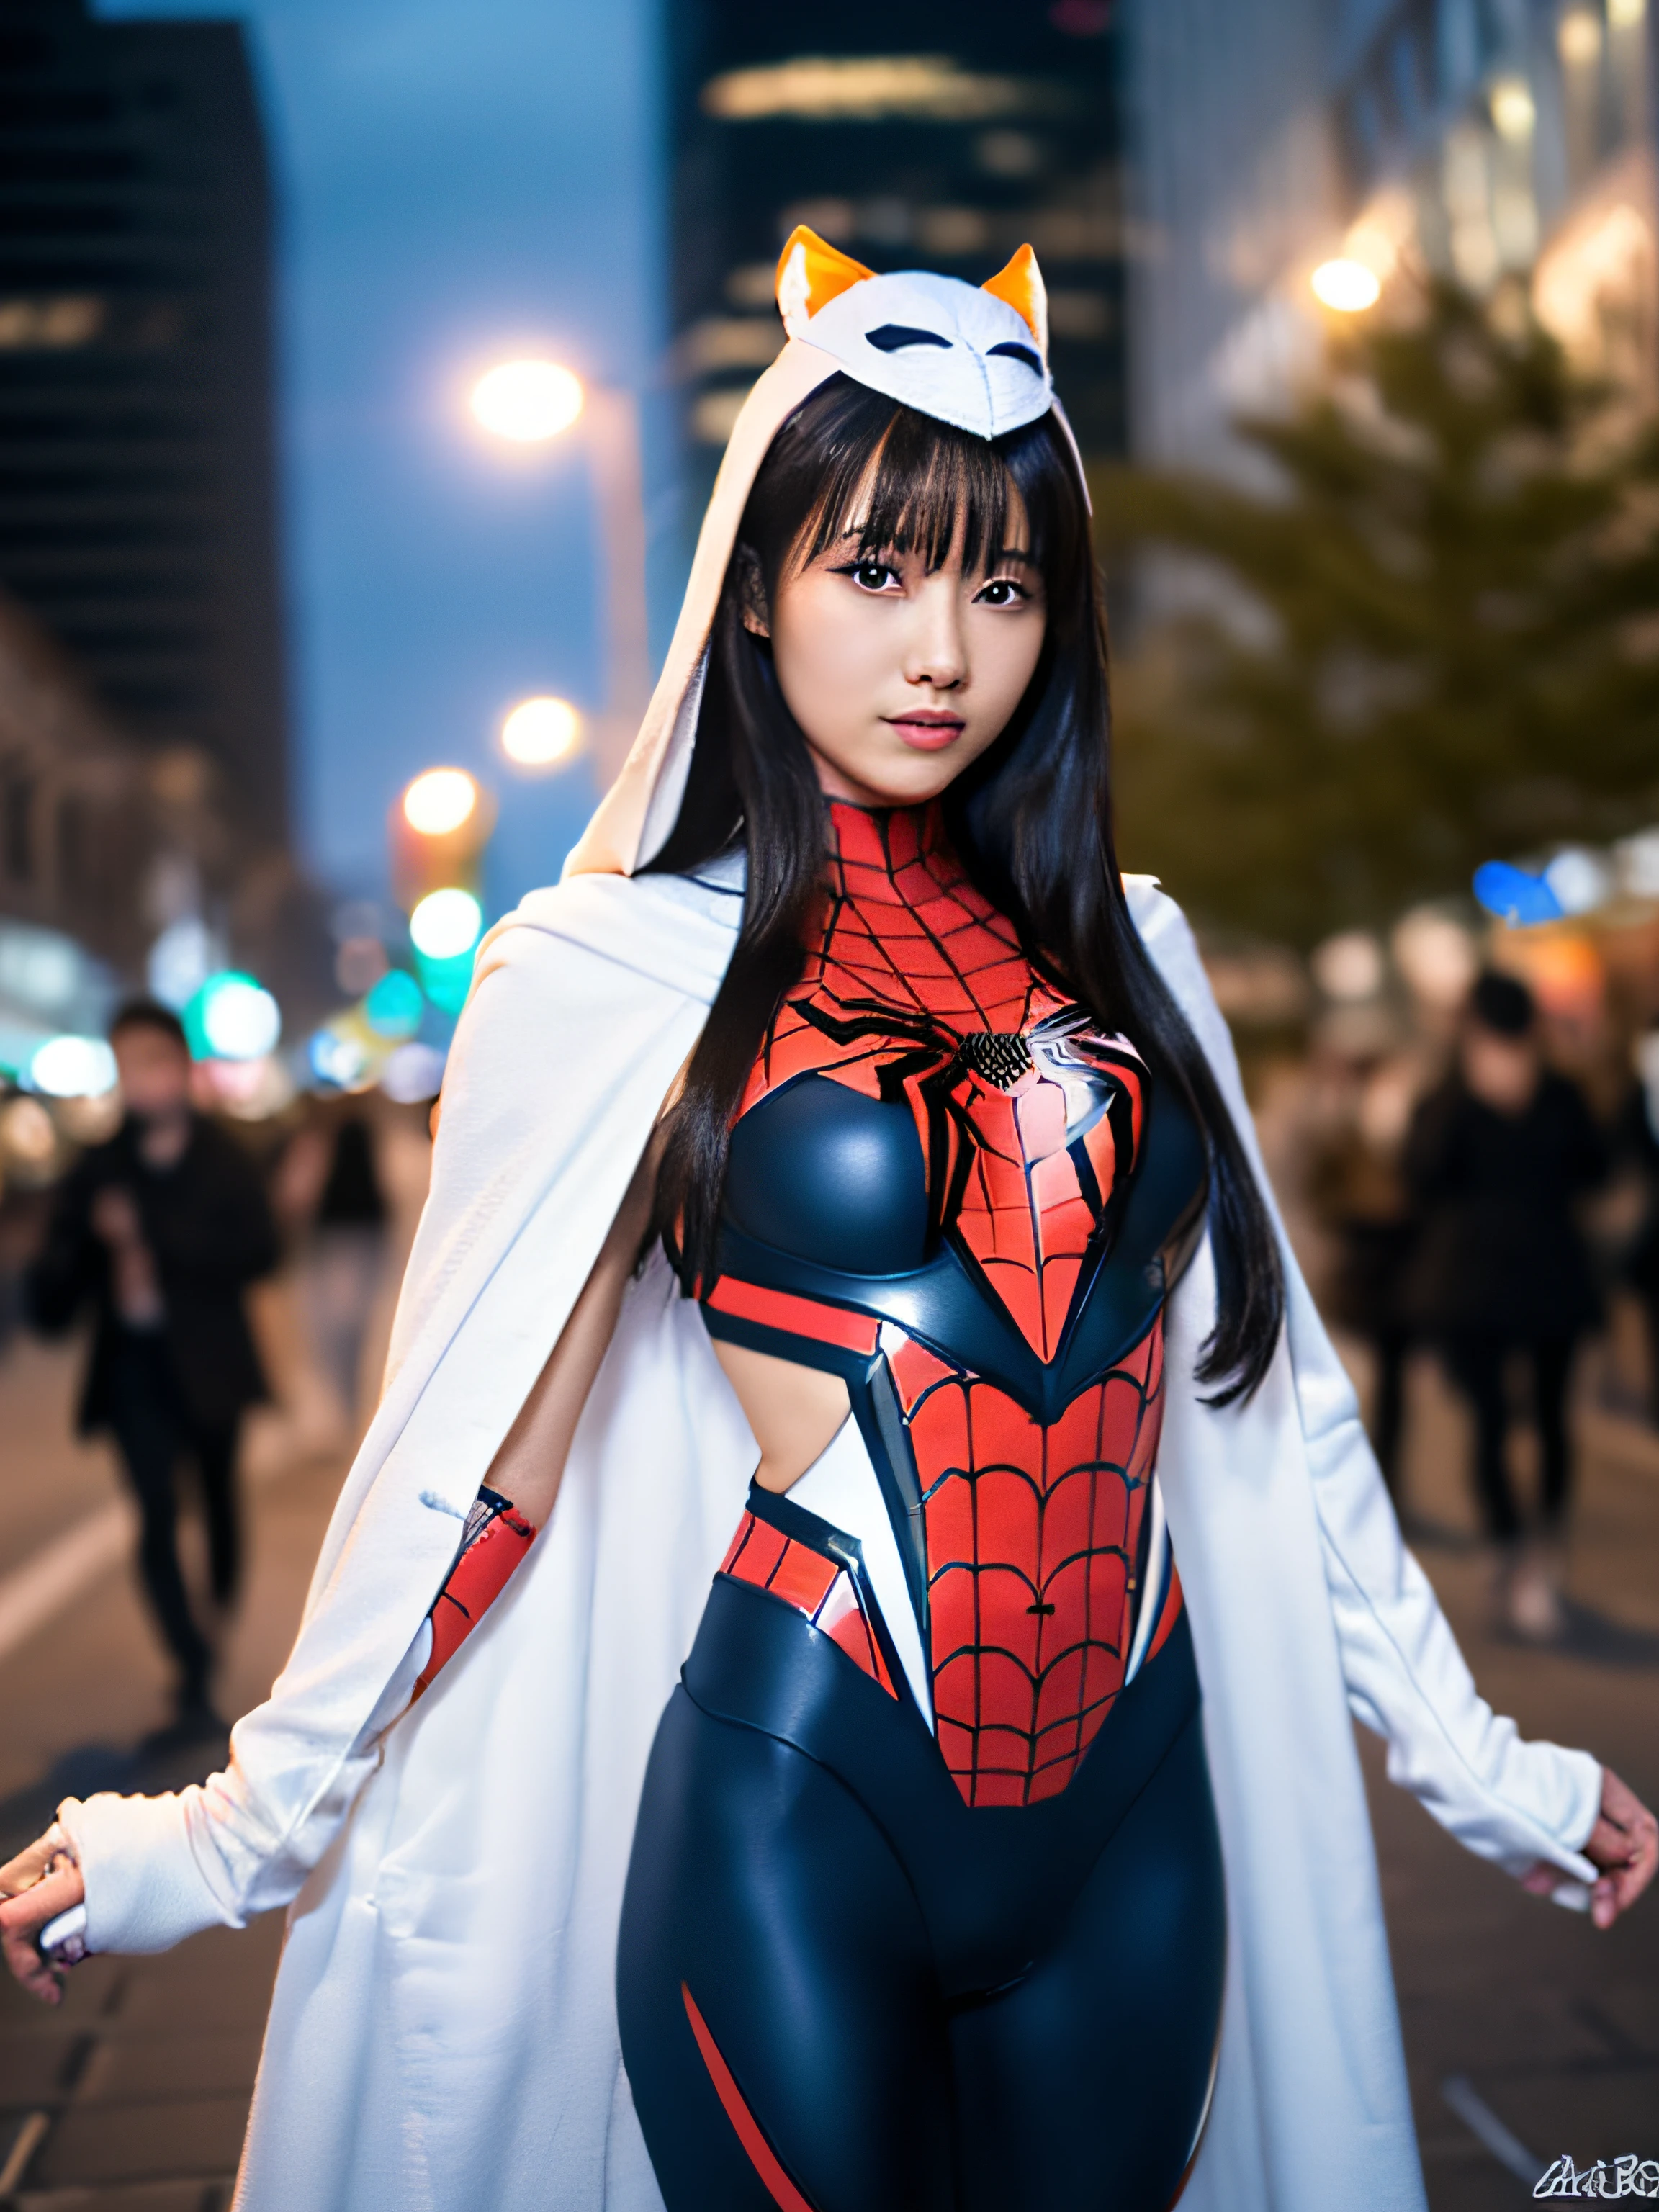 (masutepiece, 4K resolution, Ultra-realistic, Highly detailed), (Superhero theme in white costume, Charismatic, Girl on the street, Wearing a white Spider-Man costume, Superheroine), [((23 years old), (Long black hair:1.2), full bodyesbian, (Blue eyes:1.2), (Spider-Man's Dynamic Pose) ((Rough urban environment):0.8)| (Urban landscape, during night, Dynamic Lights), (fullmoon))]